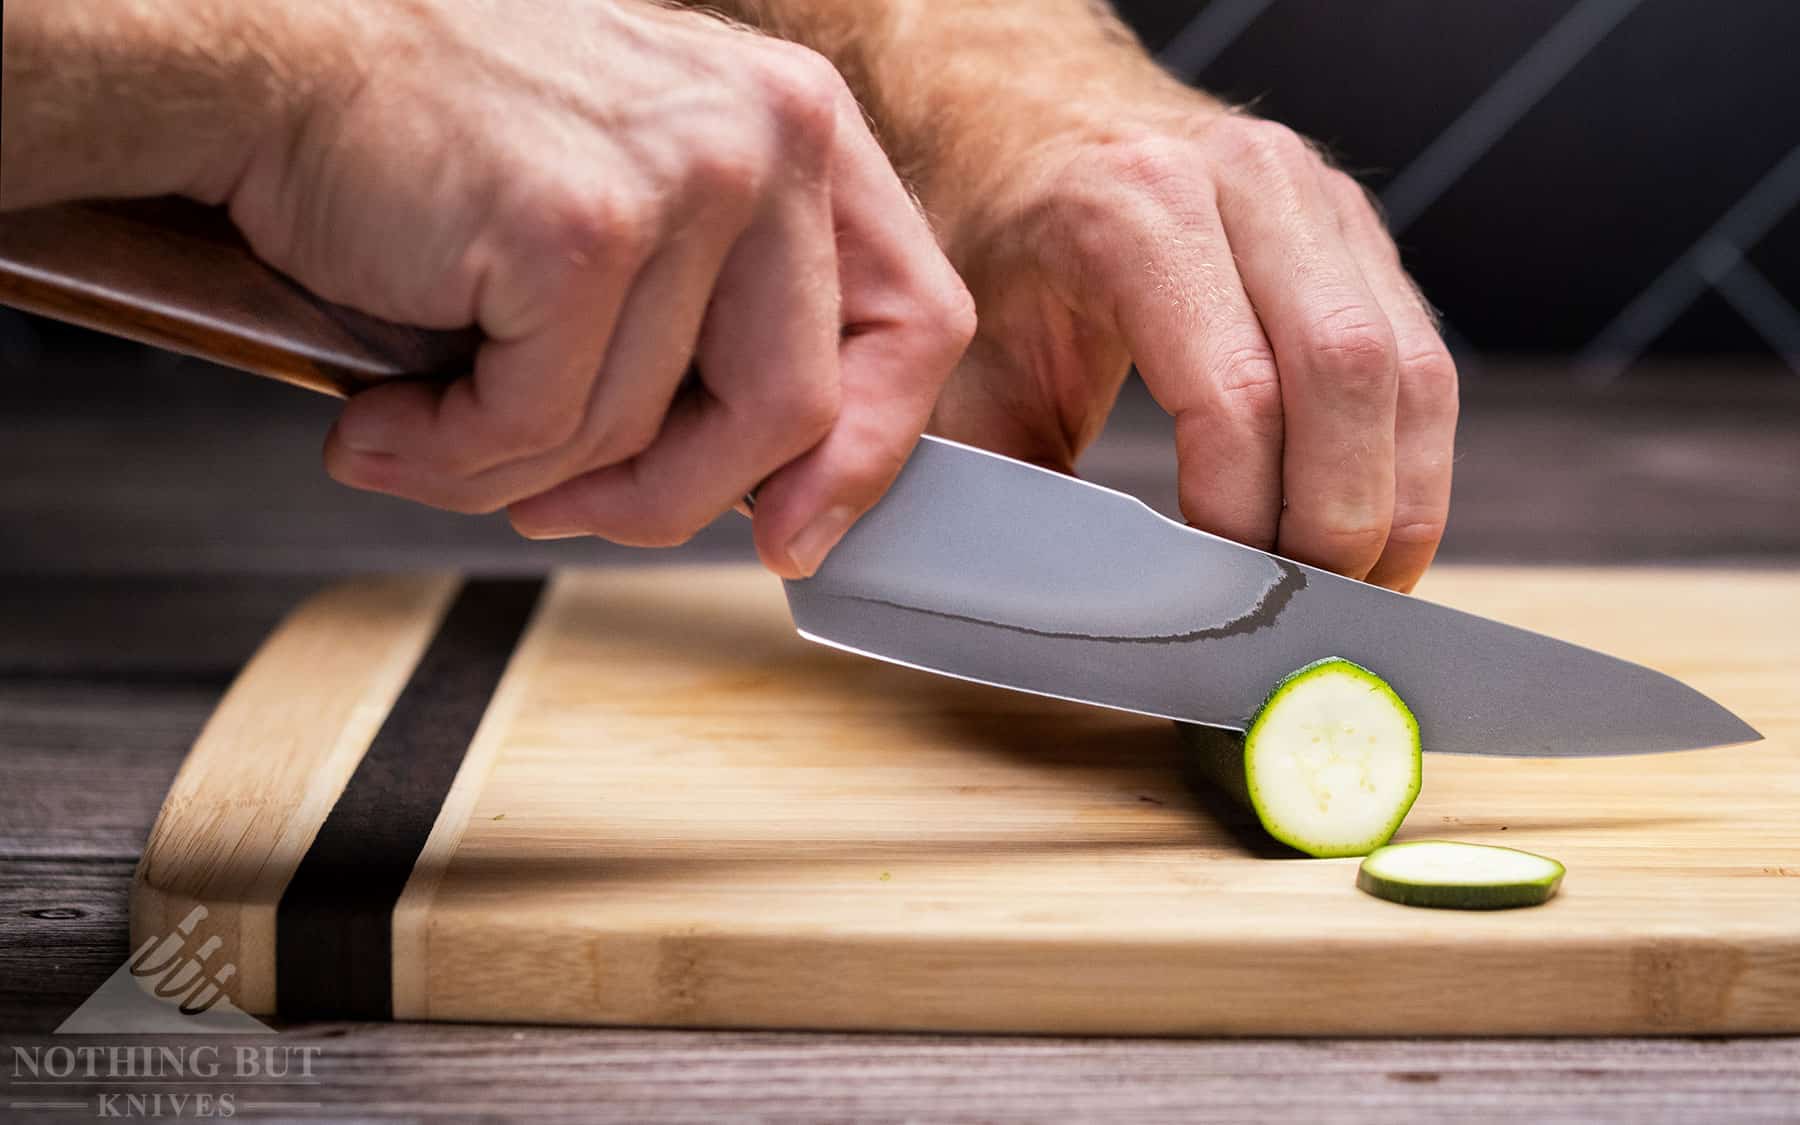 We tested the edge retention of the XinCraft 8.4 inch chef knife by cutting harder vegetables like zucchini.